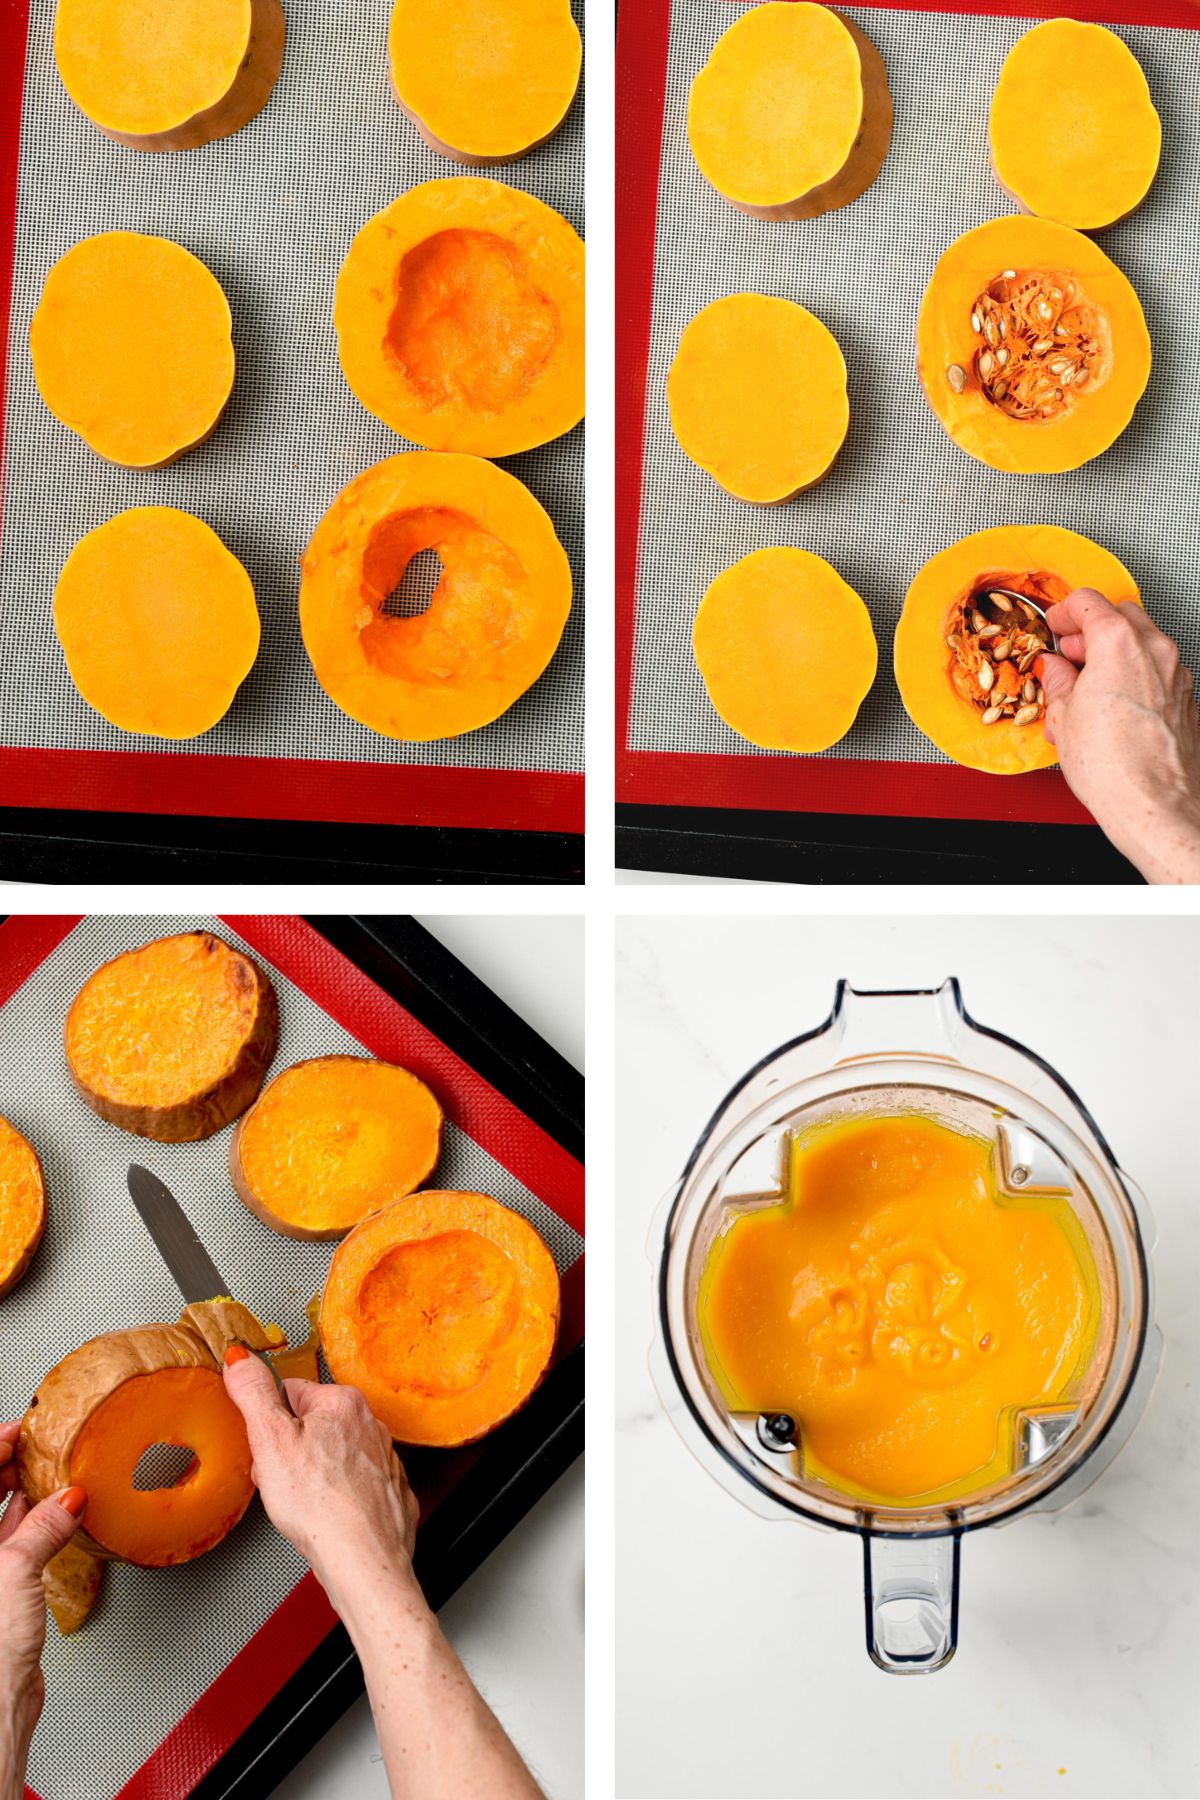 Step-by-step instructions on How to make Butternut Squash Soup